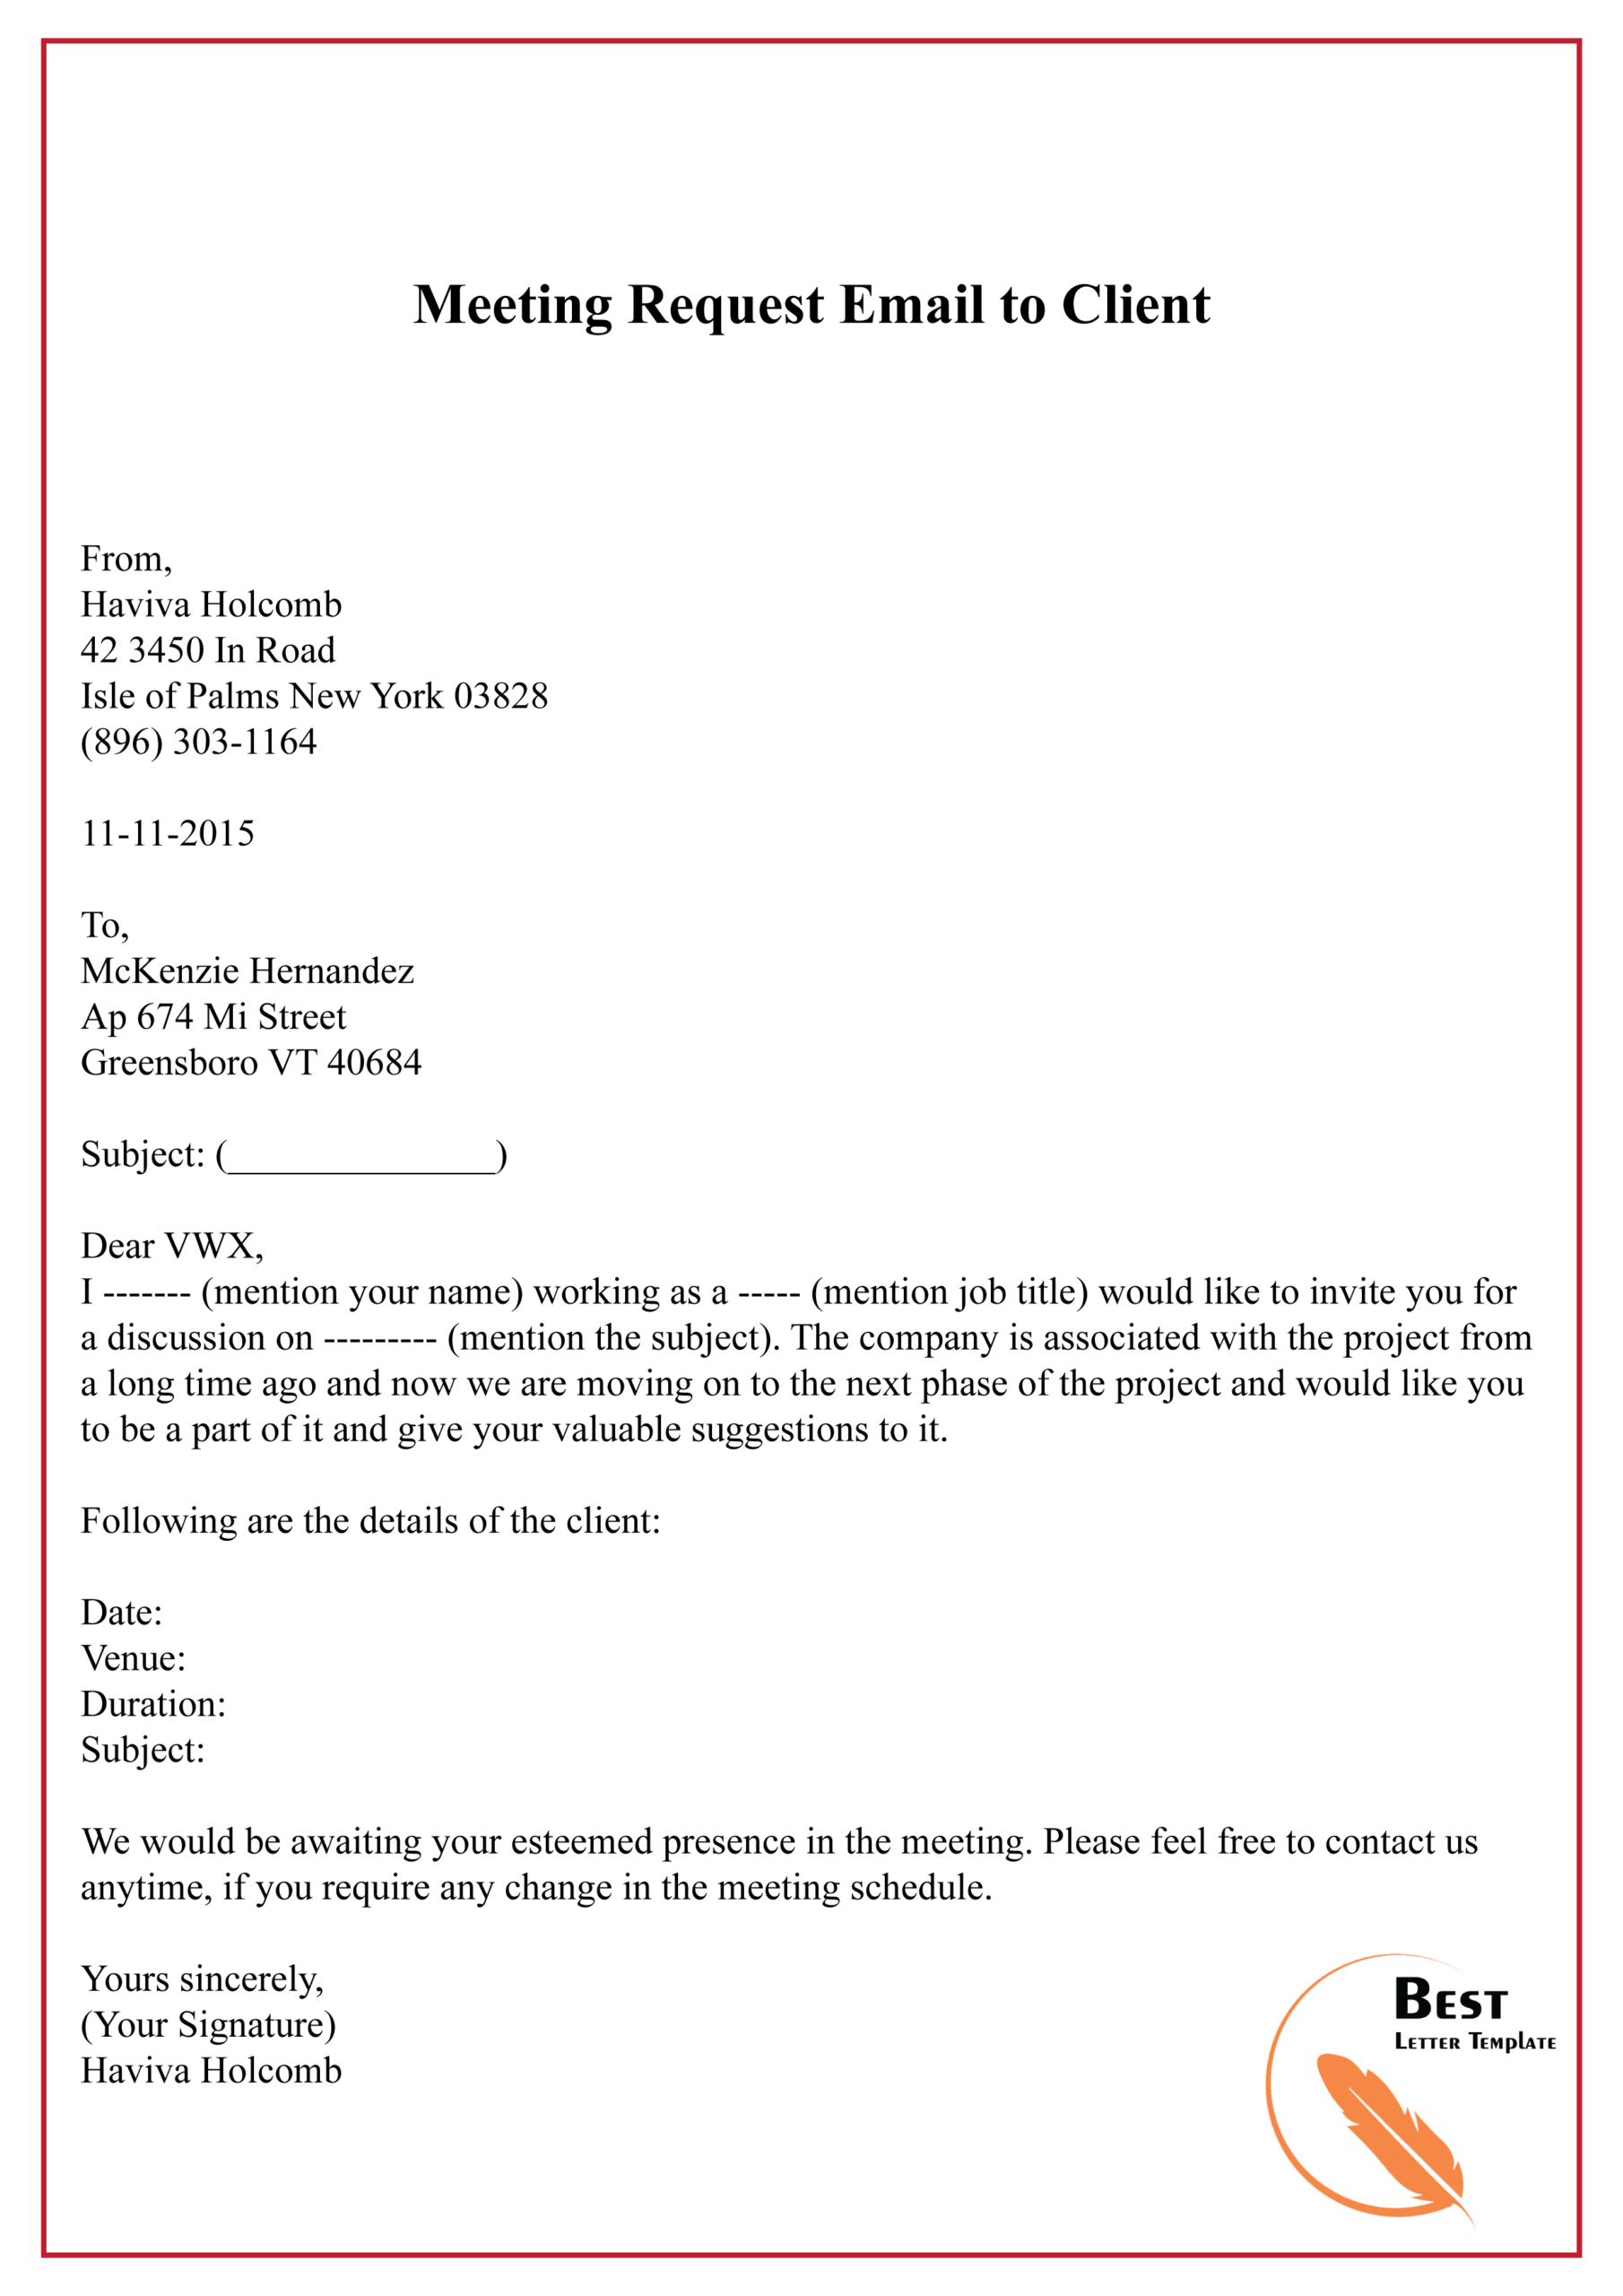 Meeting Request Email To Client 01 | Best Letter Template Inside Meeting Request Template